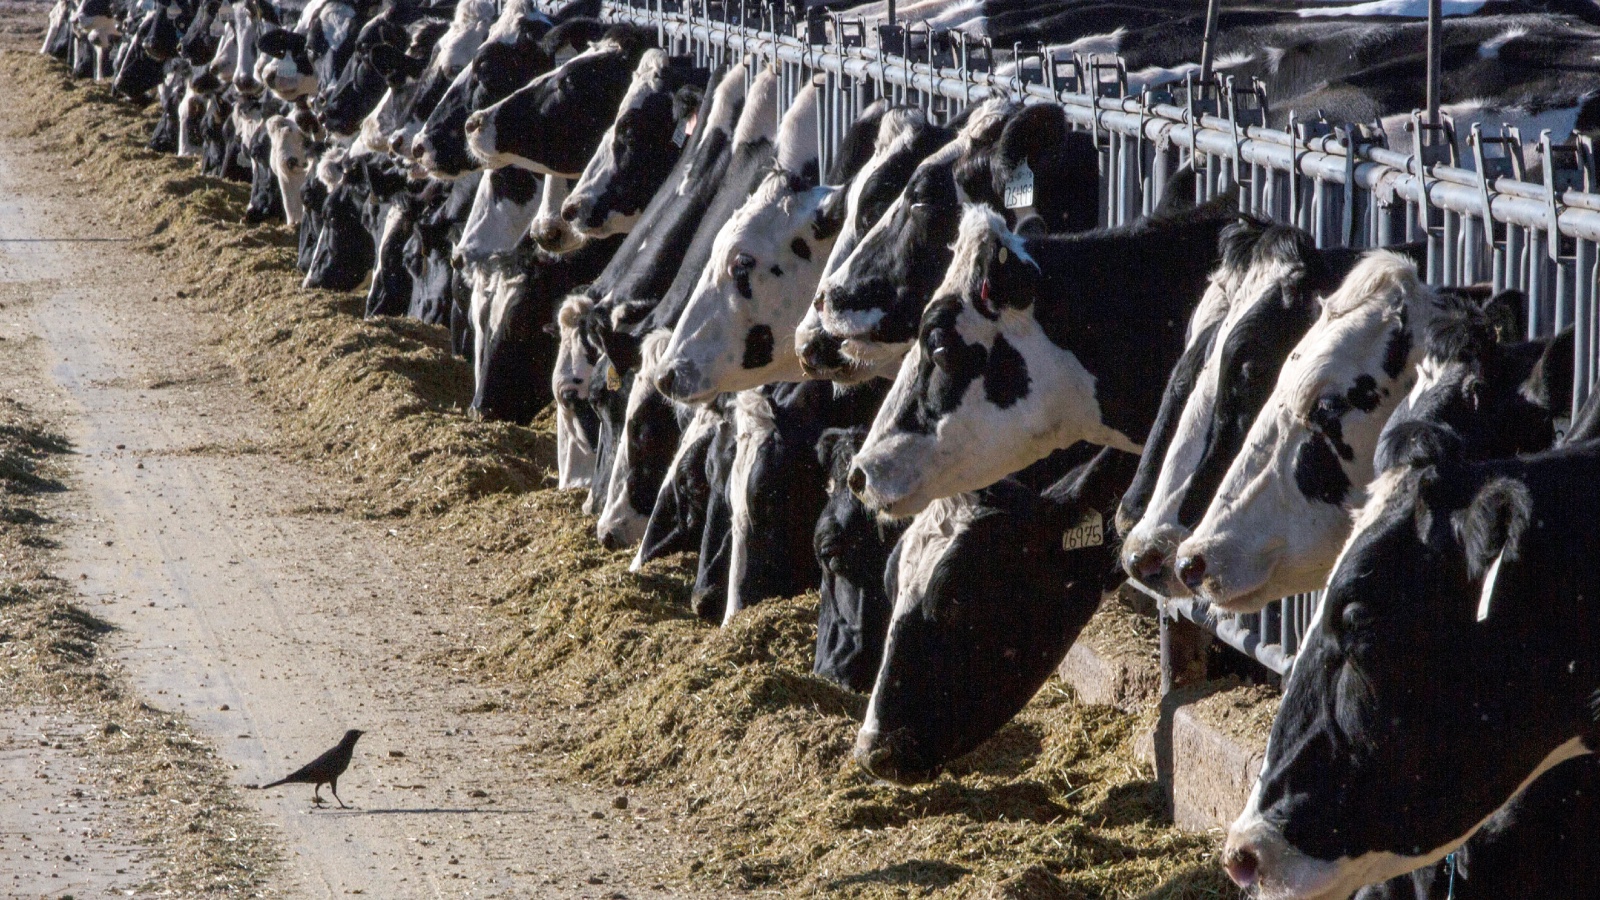 Dairy cattle feed in a row at a farm